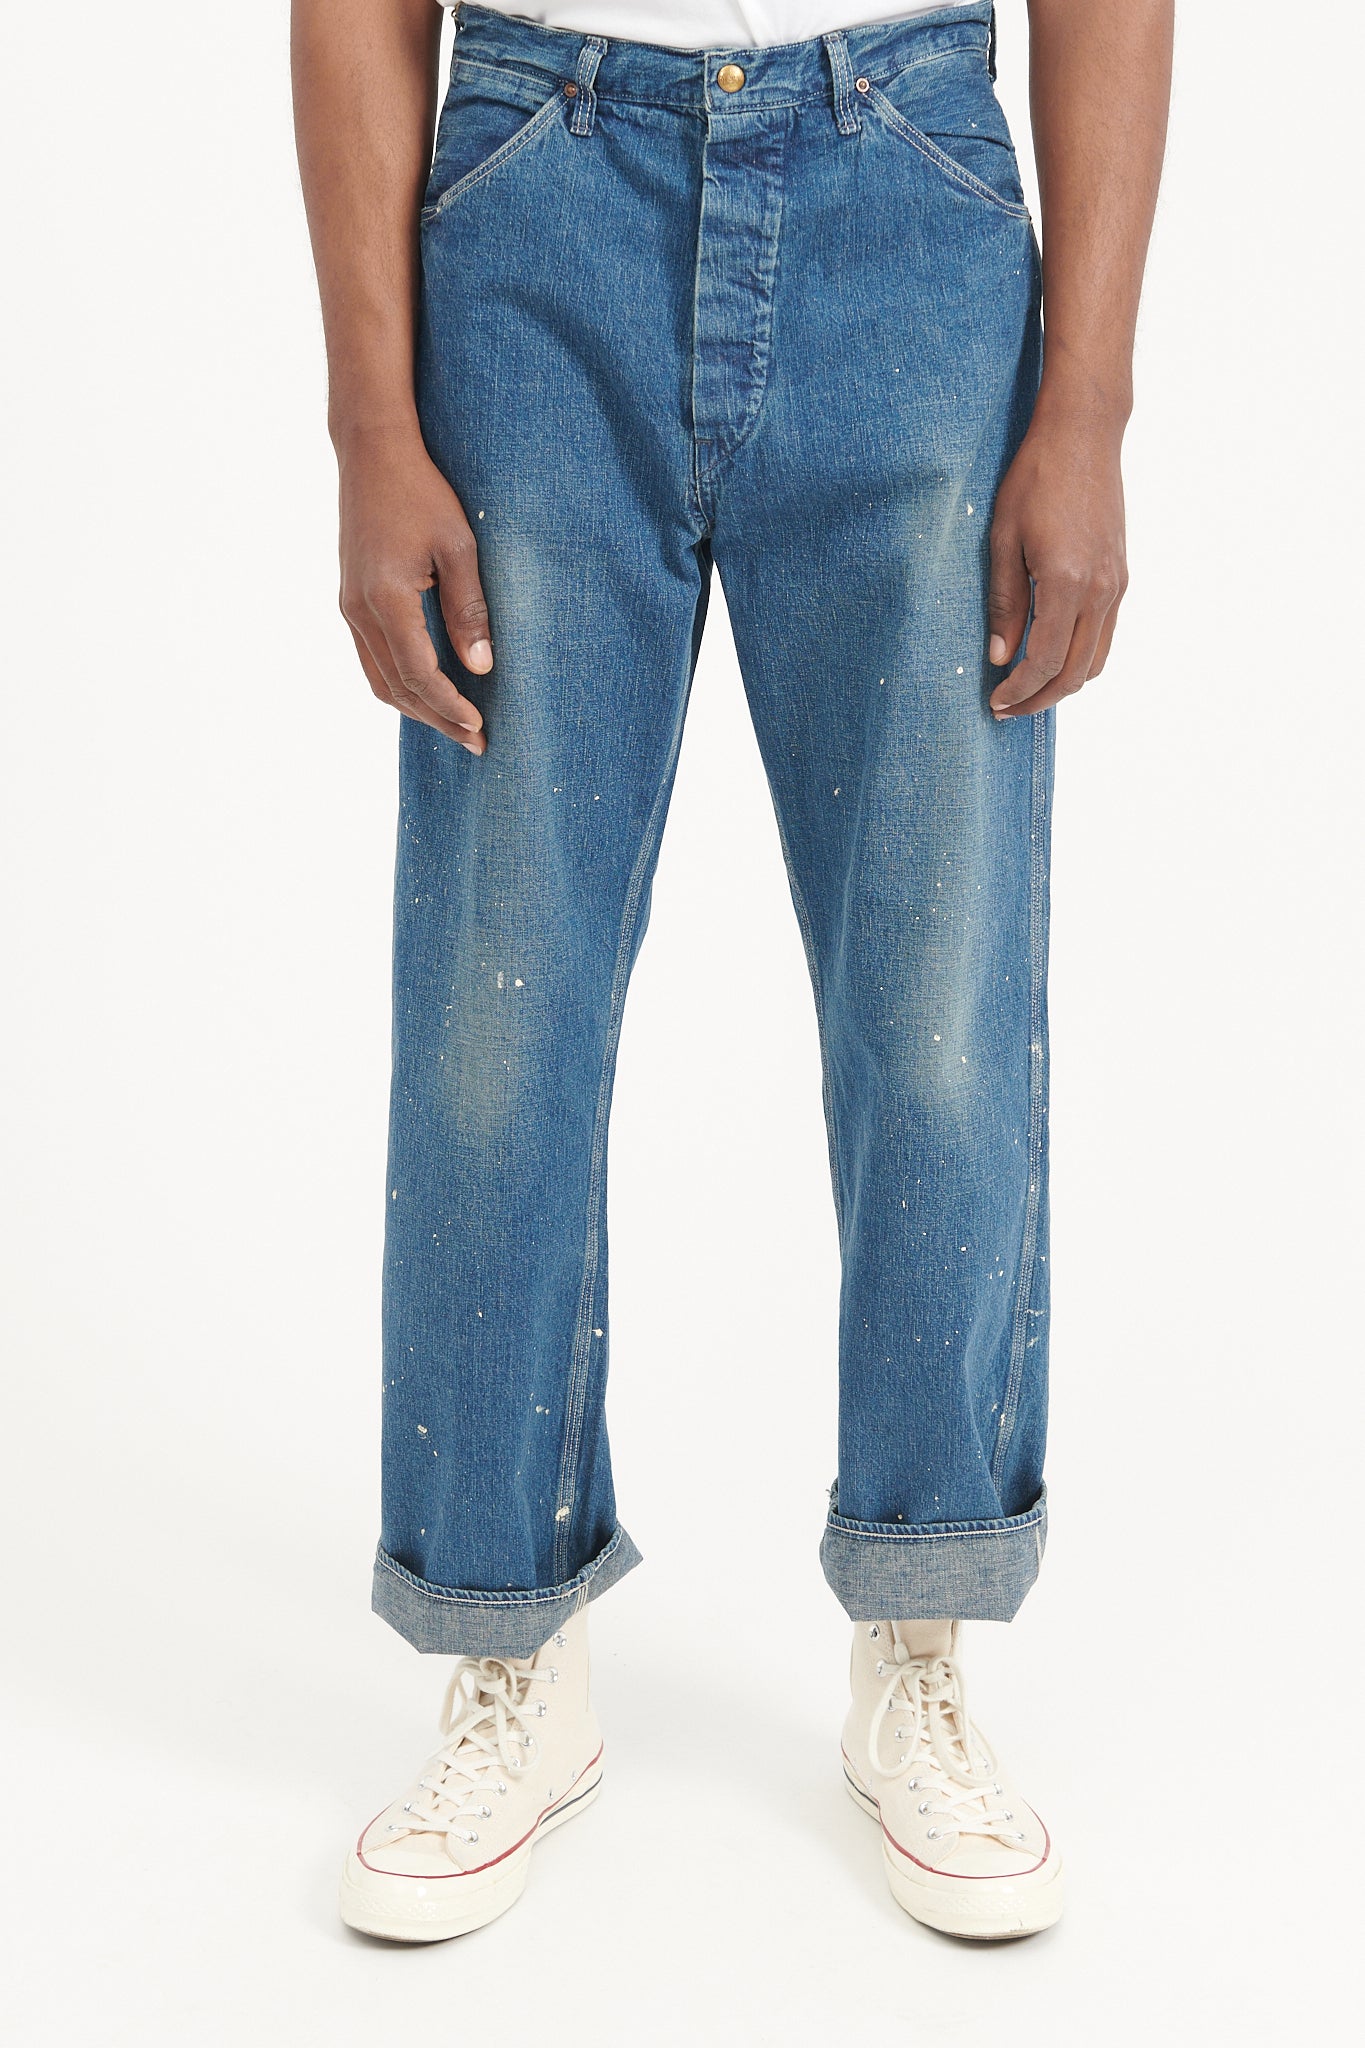 Painter Pants - Denim Used with Paint